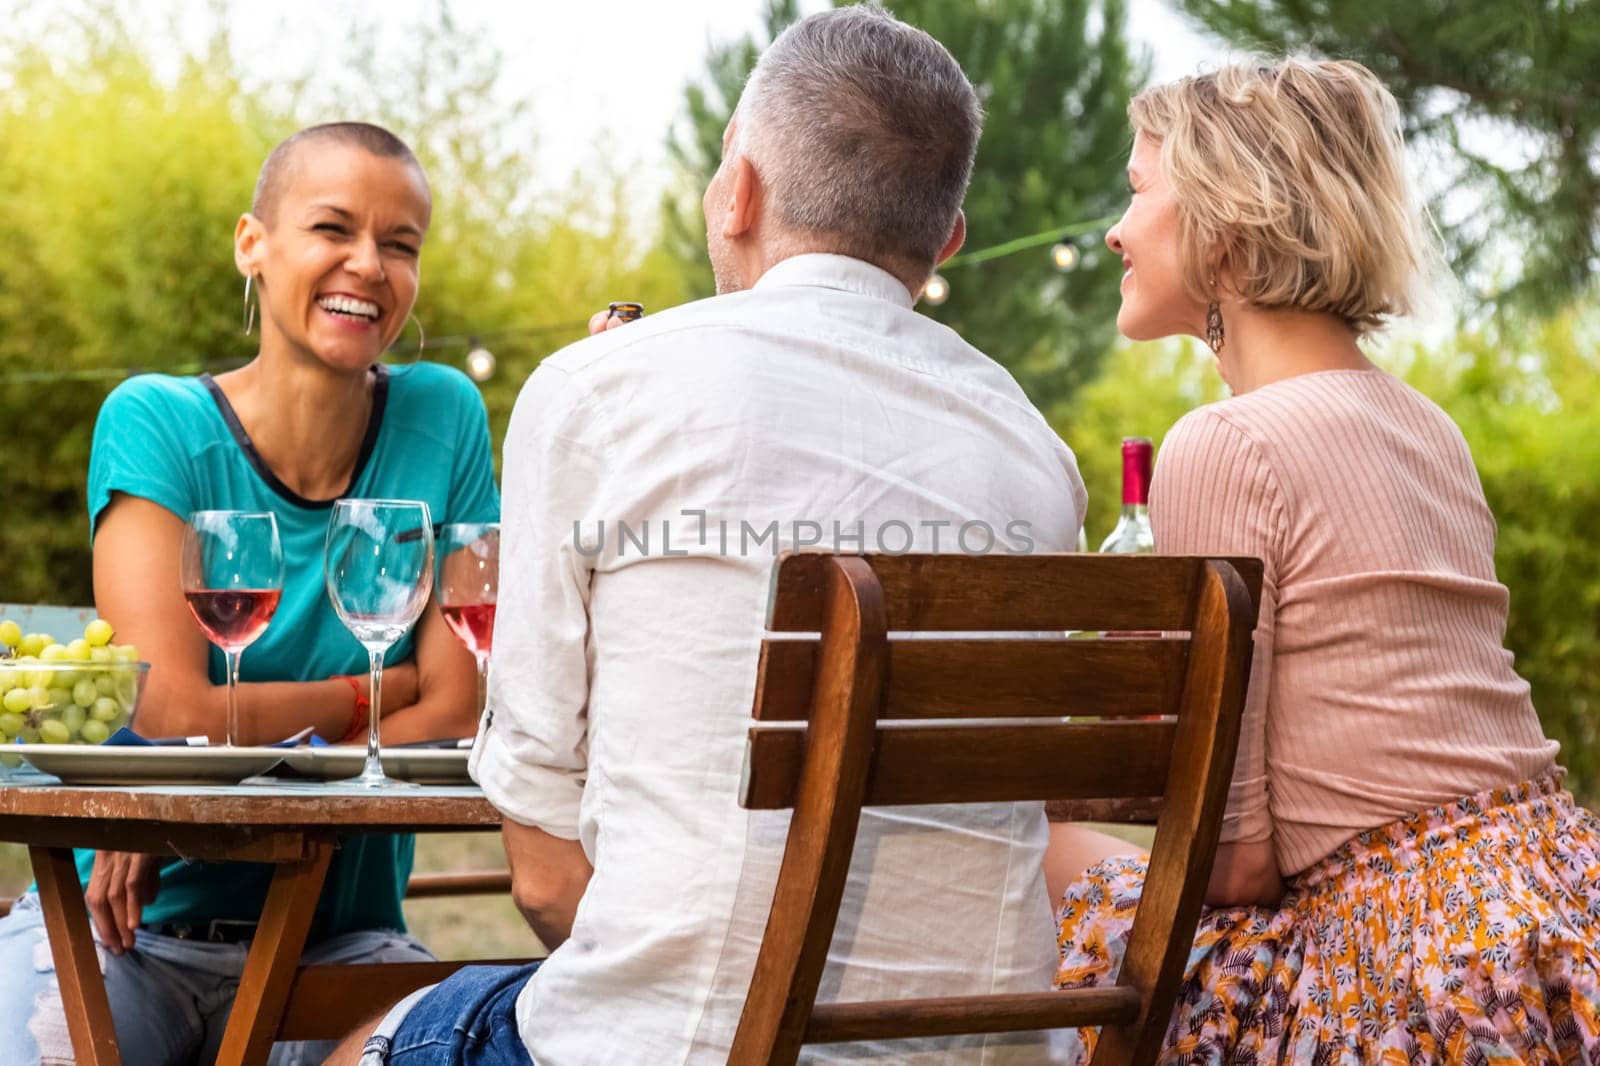 Happy and smiling woman talking to friends during garden dinner party. Lifestyle and leisure time concept.